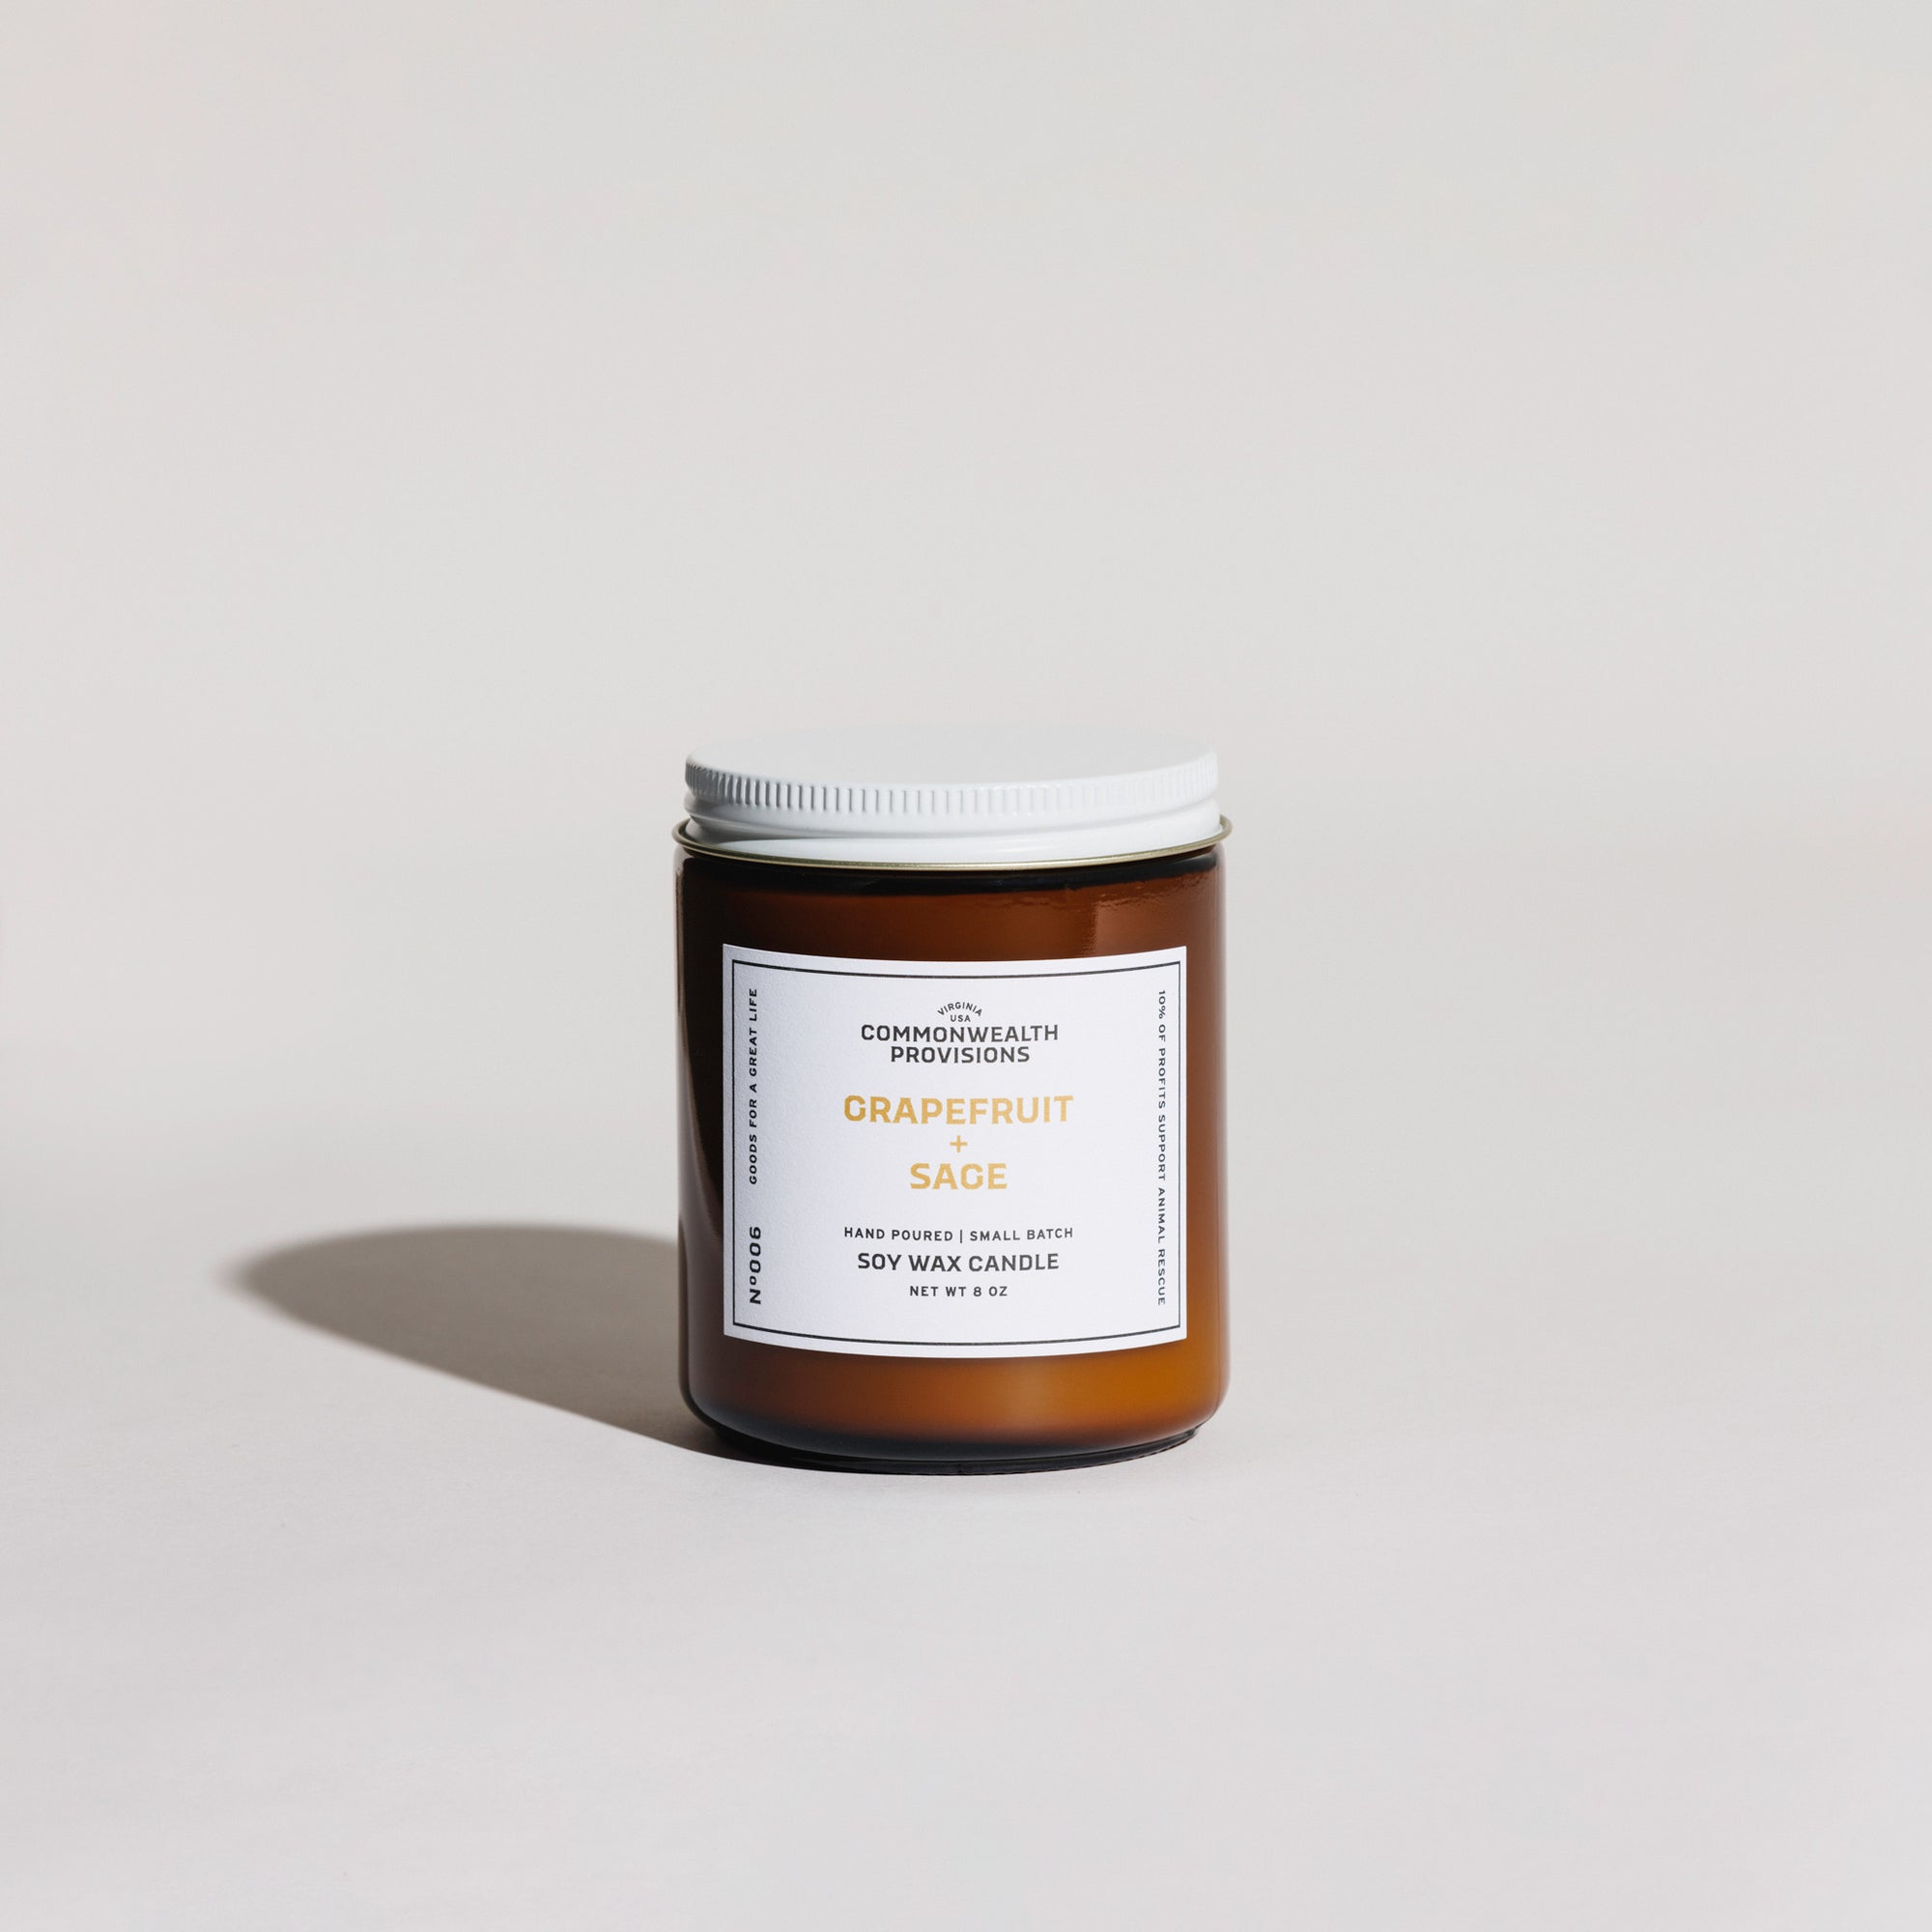 Grapefruit + Sage Standard Candle | Commonwealth Provisions